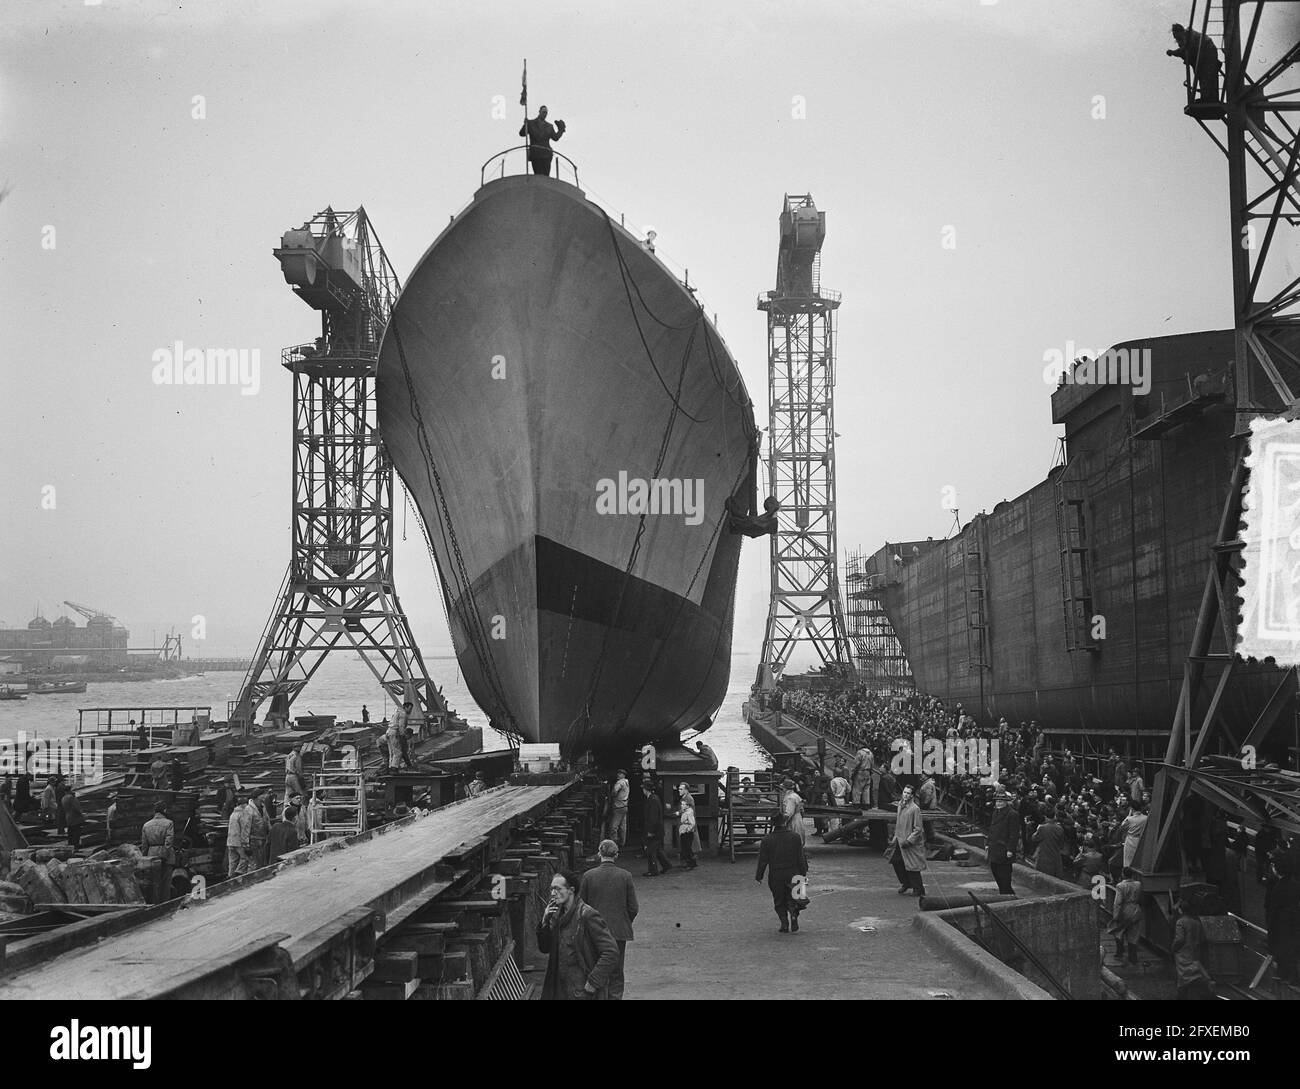 Launching NDSM submarine hunter Friesland, 21 February 1953, shipbuilding, The Netherlands, 20th century press agency photo, news to remember, documentary, historic photography 1945-1990, visual stories, human history of the Twentieth Century, capturing moments in time Stock Photo